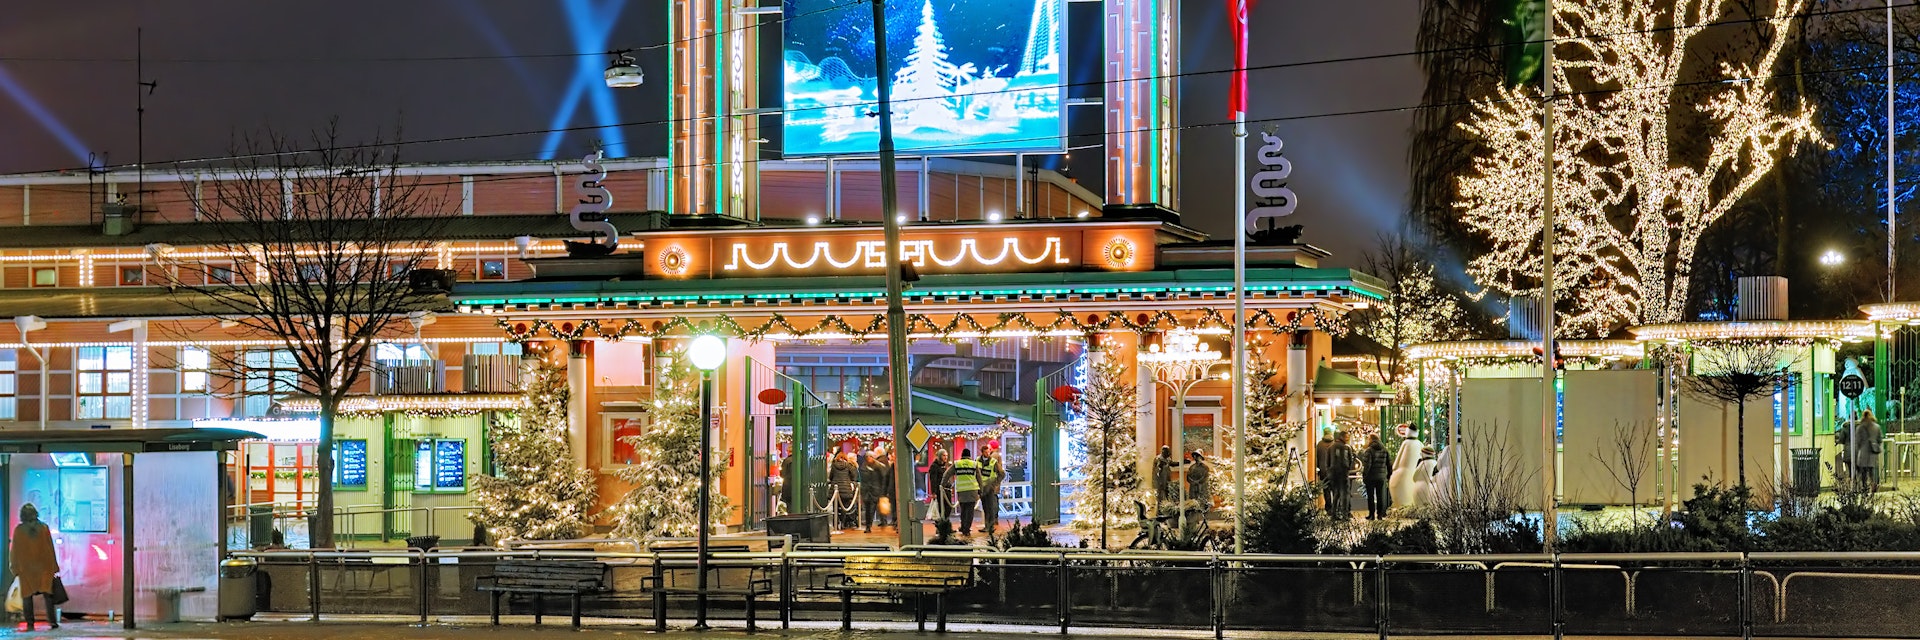 GOTHENBURG, SWEDEN - DECEMBER 17, 2015: Main entrance of Liseberg park with Christmas decoration. It is one of most visited amusement parks in Scandinavia and most famous Christmas Market of Sweden.